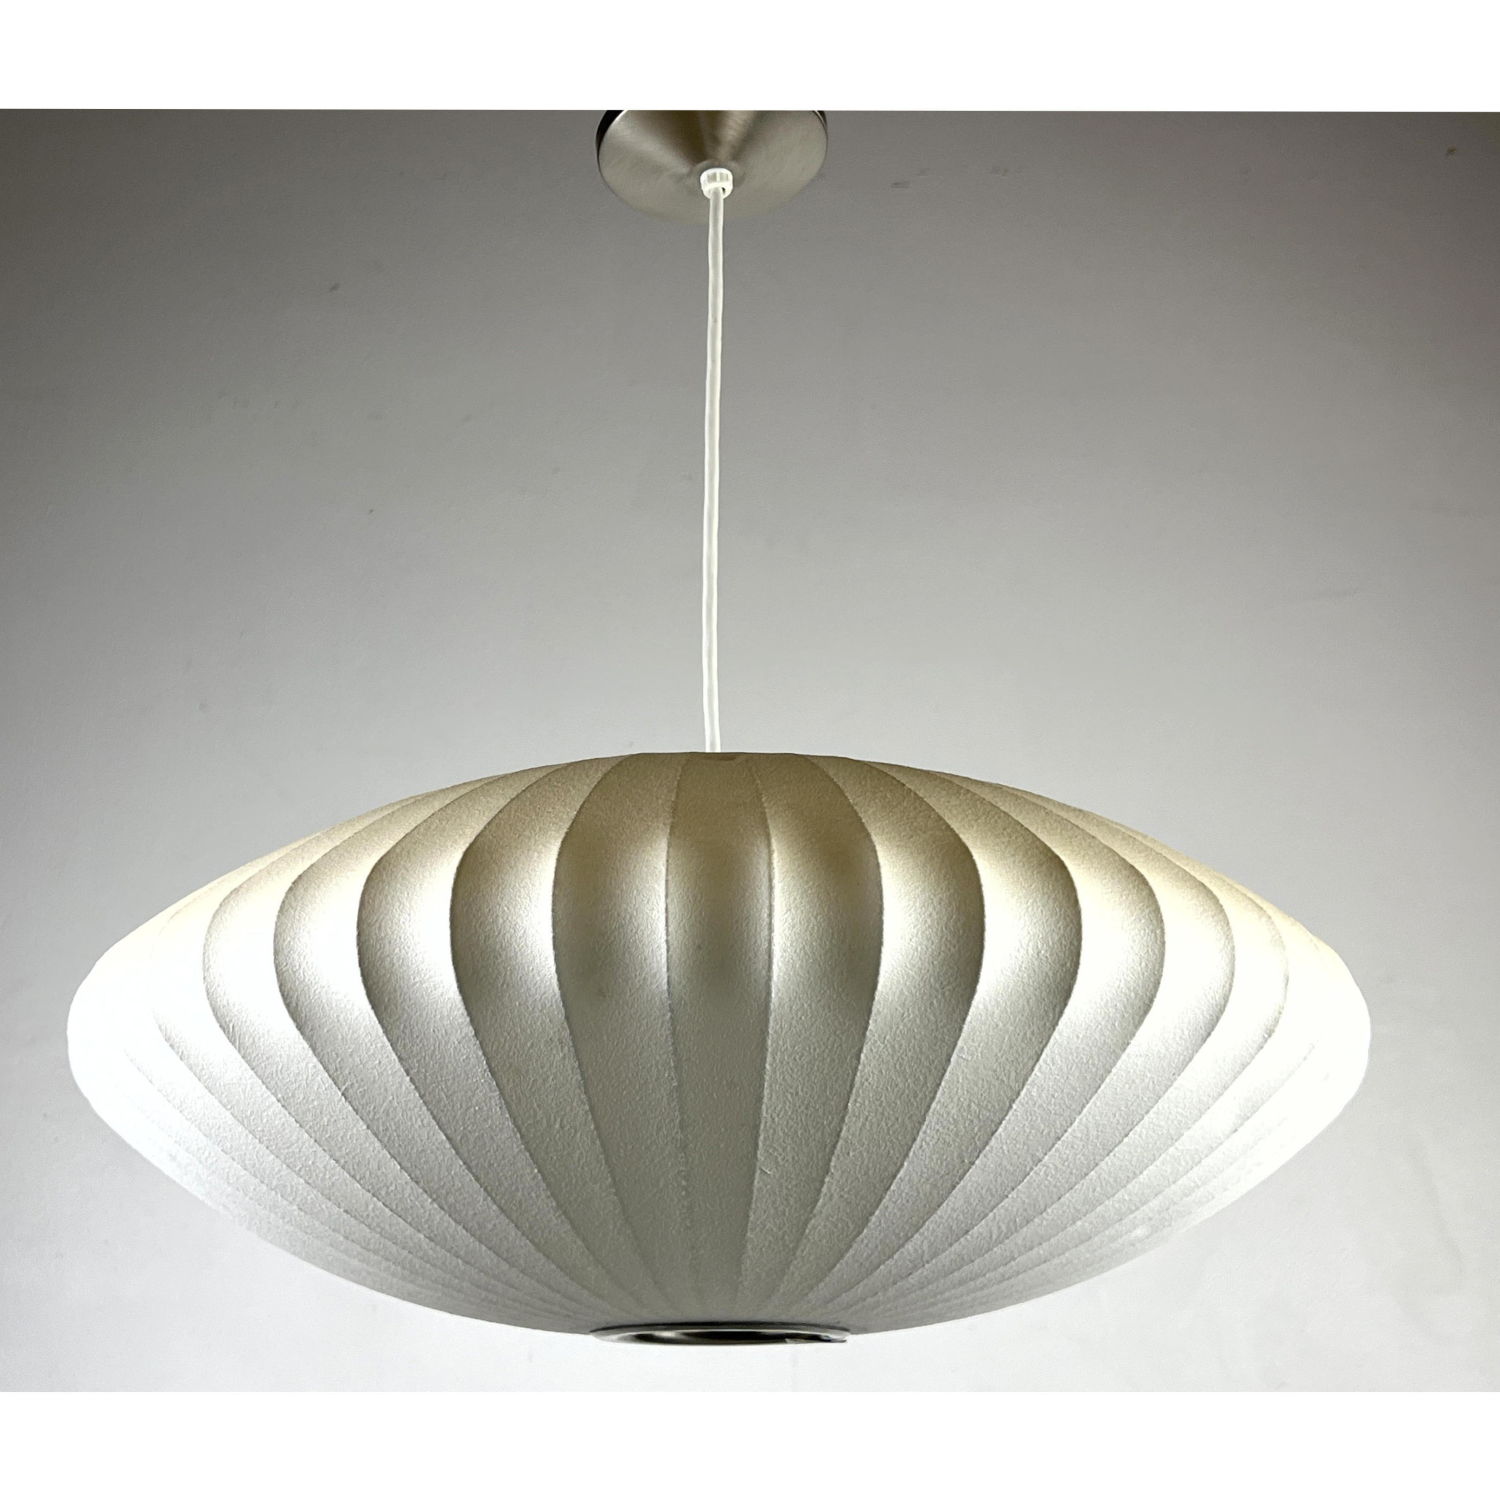 George Nelson Bubble lamp for Modernica 2ff2db